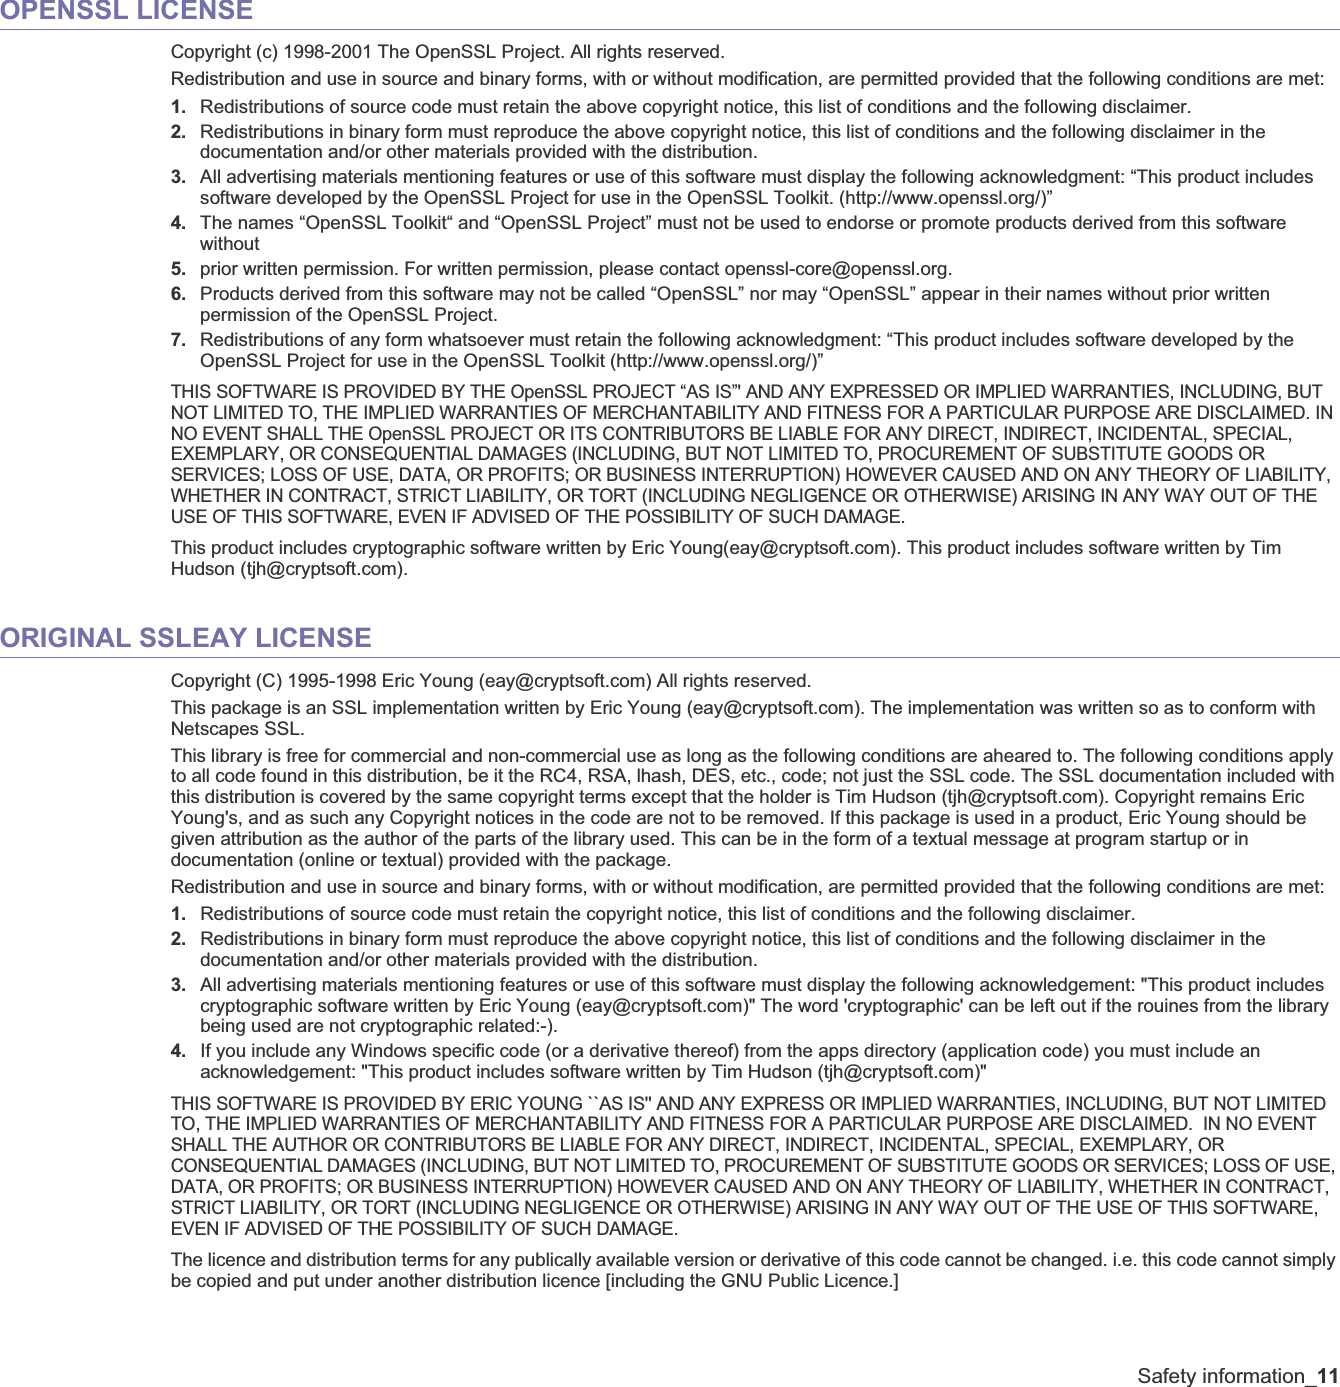 Safety information_11OPENSSL LICENSECopyright (c) 1998-2001 The OpenSSL Project. All rights reserved.Redistribution and use in source and binary forms, with or without modification, are permitted provided that the following conditions are met:1. Redistributions of source code must retain the above copyright notice, this list of conditions and the following disclaimer. 2. Redistributions in binary form must reproduce the above copyright notice, this list of conditions and the following disclaimer in the documentation and/or other materials provided with the distribution.3. All advertising materials mentioning features or use of this software must display the following acknowledgment: “This product includes software developed by the OpenSSL Project for use in the OpenSSL Toolkit. (http://www.openssl.org/)”4. The names “OpenSSL Toolkit“ and “OpenSSL Project” must not be used to endorse or promote products derived from this software without5. prior written permission. For written permission, please contact openssl-core@openssl.org.6. Products derived from this software may not be called “OpenSSL” nor may “OpenSSL” appear in their names without prior written permission of the OpenSSL Project.7. Redistributions of any form whatsoever must retain the following acknowledgment: “This product includes software developed by the OpenSSL Project for use in the OpenSSL Toolkit (http://www.openssl.org/)”THIS SOFTWARE IS PROVIDED BY THE OpenSSL PROJECT “AS IS”&apos; AND ANY EXPRESSED OR IMPLIED WARRANTIES, INCLUDING, BUT NOT LIMITED TO, THE IMPLIED WARRANTIES OF MERCHANTABILITY AND FITNESS FOR A PARTICULAR PURPOSE ARE DISCLAIMED. IN NO EVENT SHALL THE OpenSSL PROJECT OR ITS CONTRIBUTORS BE LIABLE FOR ANY DIRECT, INDIRECT, INCIDENTAL, SPECIAL, EXEMPLARY, OR CONSEQUENTIAL DAMAGES (INCLUDING, BUT NOT LIMITED TO, PROCUREMENT OF SUBSTITUTE GOODS OR SERVICES; LOSS OF USE, DATA, OR PROFITS; OR BUSINESS INTERRUPTION) HOWEVER CAUSED AND ON ANY THEORY OF LIABILITY, WHETHER IN CONTRACT, STRICT LIABILITY, OR TORT (INCLUDING NEGLIGENCE OR OTHERWISE) ARISING IN ANY WAY OUT OF THE USE OF THIS SOFTWARE, EVEN IF ADVISED OF THE POSSIBILITY OF SUCH DAMAGE.This product includes cryptographic software written by Eric Young(eay@cryptsoft.com). This product includes software written by Tim Hudson (tjh@cryptsoft.com).ORIGINAL SSLEAY LICENSECopyright (C) 1995-1998 Eric Young (eay@cryptsoft.com) All rights reserved.This package is an SSL implementation written by Eric Young (eay@cryptsoft.com). The implementation was written so as to conform with Netscapes SSL.This library is free for commercial and non-commercial use as long as the following conditions are aheared to. The following conditions apply to all code found in this distribution, be it the RC4, RSA, lhash, DES, etc., code; not just the SSL code. The SSL documentation included with this distribution is covered by the same copyright terms except that the holder is Tim Hudson (tjh@cryptsoft.com). Copyright remains Eric Young&apos;s, and as such any Copyright notices in the code are not to be removed. If this package is used in a product, Eric Young should be given attribution as the author of the parts of the library used. This can be in the form of a textual message at program startup or in documentation (online or textual) provided with the package.Redistribution and use in source and binary forms, with or without modification, are permitted provided that the following conditions are met:1. Redistributions of source code must retain the copyright notice, this list of conditions and the following disclaimer.2. Redistributions in binary form must reproduce the above copyright notice, this list of conditions and the following disclaimer in the documentation and/or other materials provided with the distribution.3. All advertising materials mentioning features or use of this software must display the following acknowledgement: &quot;This product includes cryptographic software written by Eric Young (eay@cryptsoft.com)&quot; The word &apos;cryptographic&apos; can be left out if the rouines from the library being used are not cryptographic related:-). 4. If you include any Windows specific code (or a derivative thereof) from the apps directory (application code) you must include an acknowledgement: &quot;This product includes software written by Tim Hudson (tjh@cryptsoft.com)&quot;THIS SOFTWARE IS PROVIDED BY ERIC YOUNG ``AS IS&apos;&apos; AND ANY EXPRESS OR IMPLIED WARRANTIES, INCLUDING, BUT NOT LIMITED TO, THE IMPLIED WARRANTIES OF MERCHANTABILITY AND FITNESS FOR A PARTICULAR PURPOSE ARE DISCLAIMED.  IN NO EVENT SHALL THE AUTHOR OR CONTRIBUTORS BE LIABLE FOR ANY DIRECT, INDIRECT, INCIDENTAL, SPECIAL, EXEMPLARY, OR CONSEQUENTIAL DAMAGES (INCLUDING, BUT NOT LIMITED TO, PROCUREMENT OF SUBSTITUTE GOODS OR SERVICES; LOSS OF USE, DATA, OR PROFITS; OR BUSINESS INTERRUPTION) HOWEVER CAUSED AND ON ANY THEORY OF LIABILITY, WHETHER IN CONTRACT, STRICT LIABILITY, OR TORT (INCLUDING NEGLIGENCE OR OTHERWISE) ARISING IN ANY WAY OUT OF THE USE OF THIS SOFTWARE, EVEN IF ADVISED OF THE POSSIBILITY OF SUCH DAMAGE.The licence and distribution terms for any publically available version or derivative of this code cannot be changed. i.e. this code cannot simply be copied and put under another distribution licence [including the GNU Public Licence.]